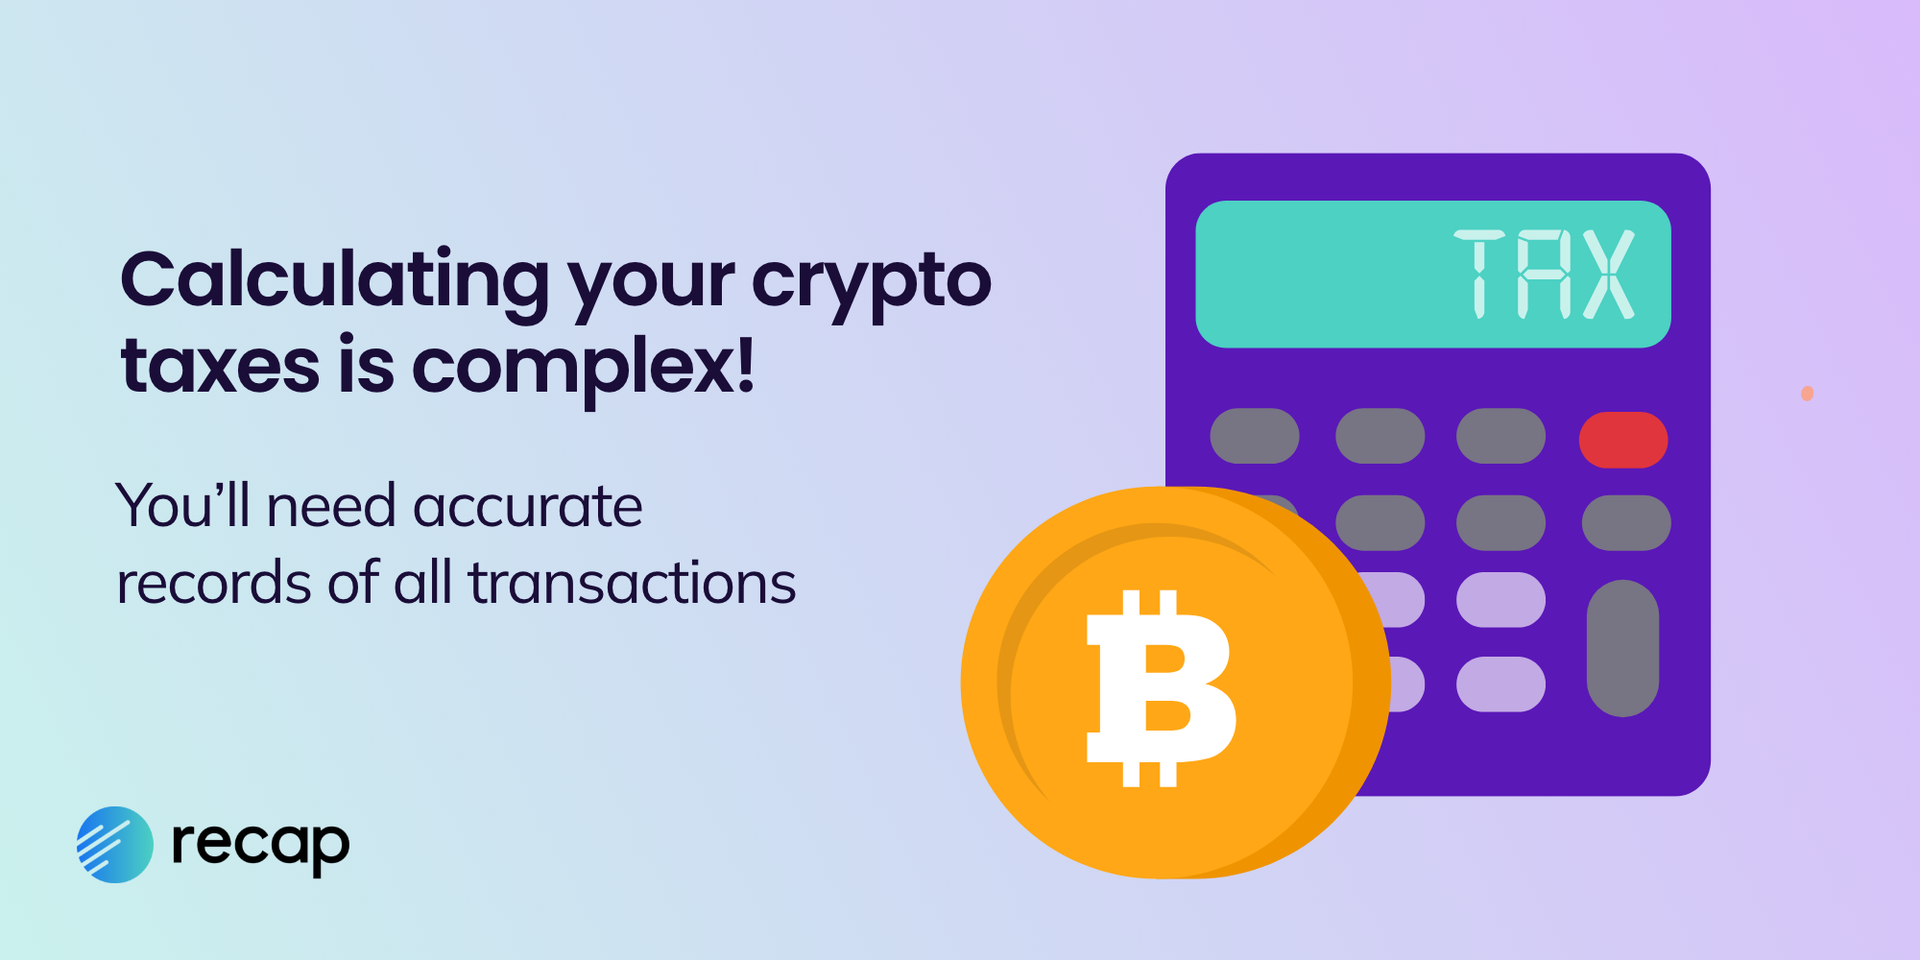 Calculating your crypto taxes is complex!